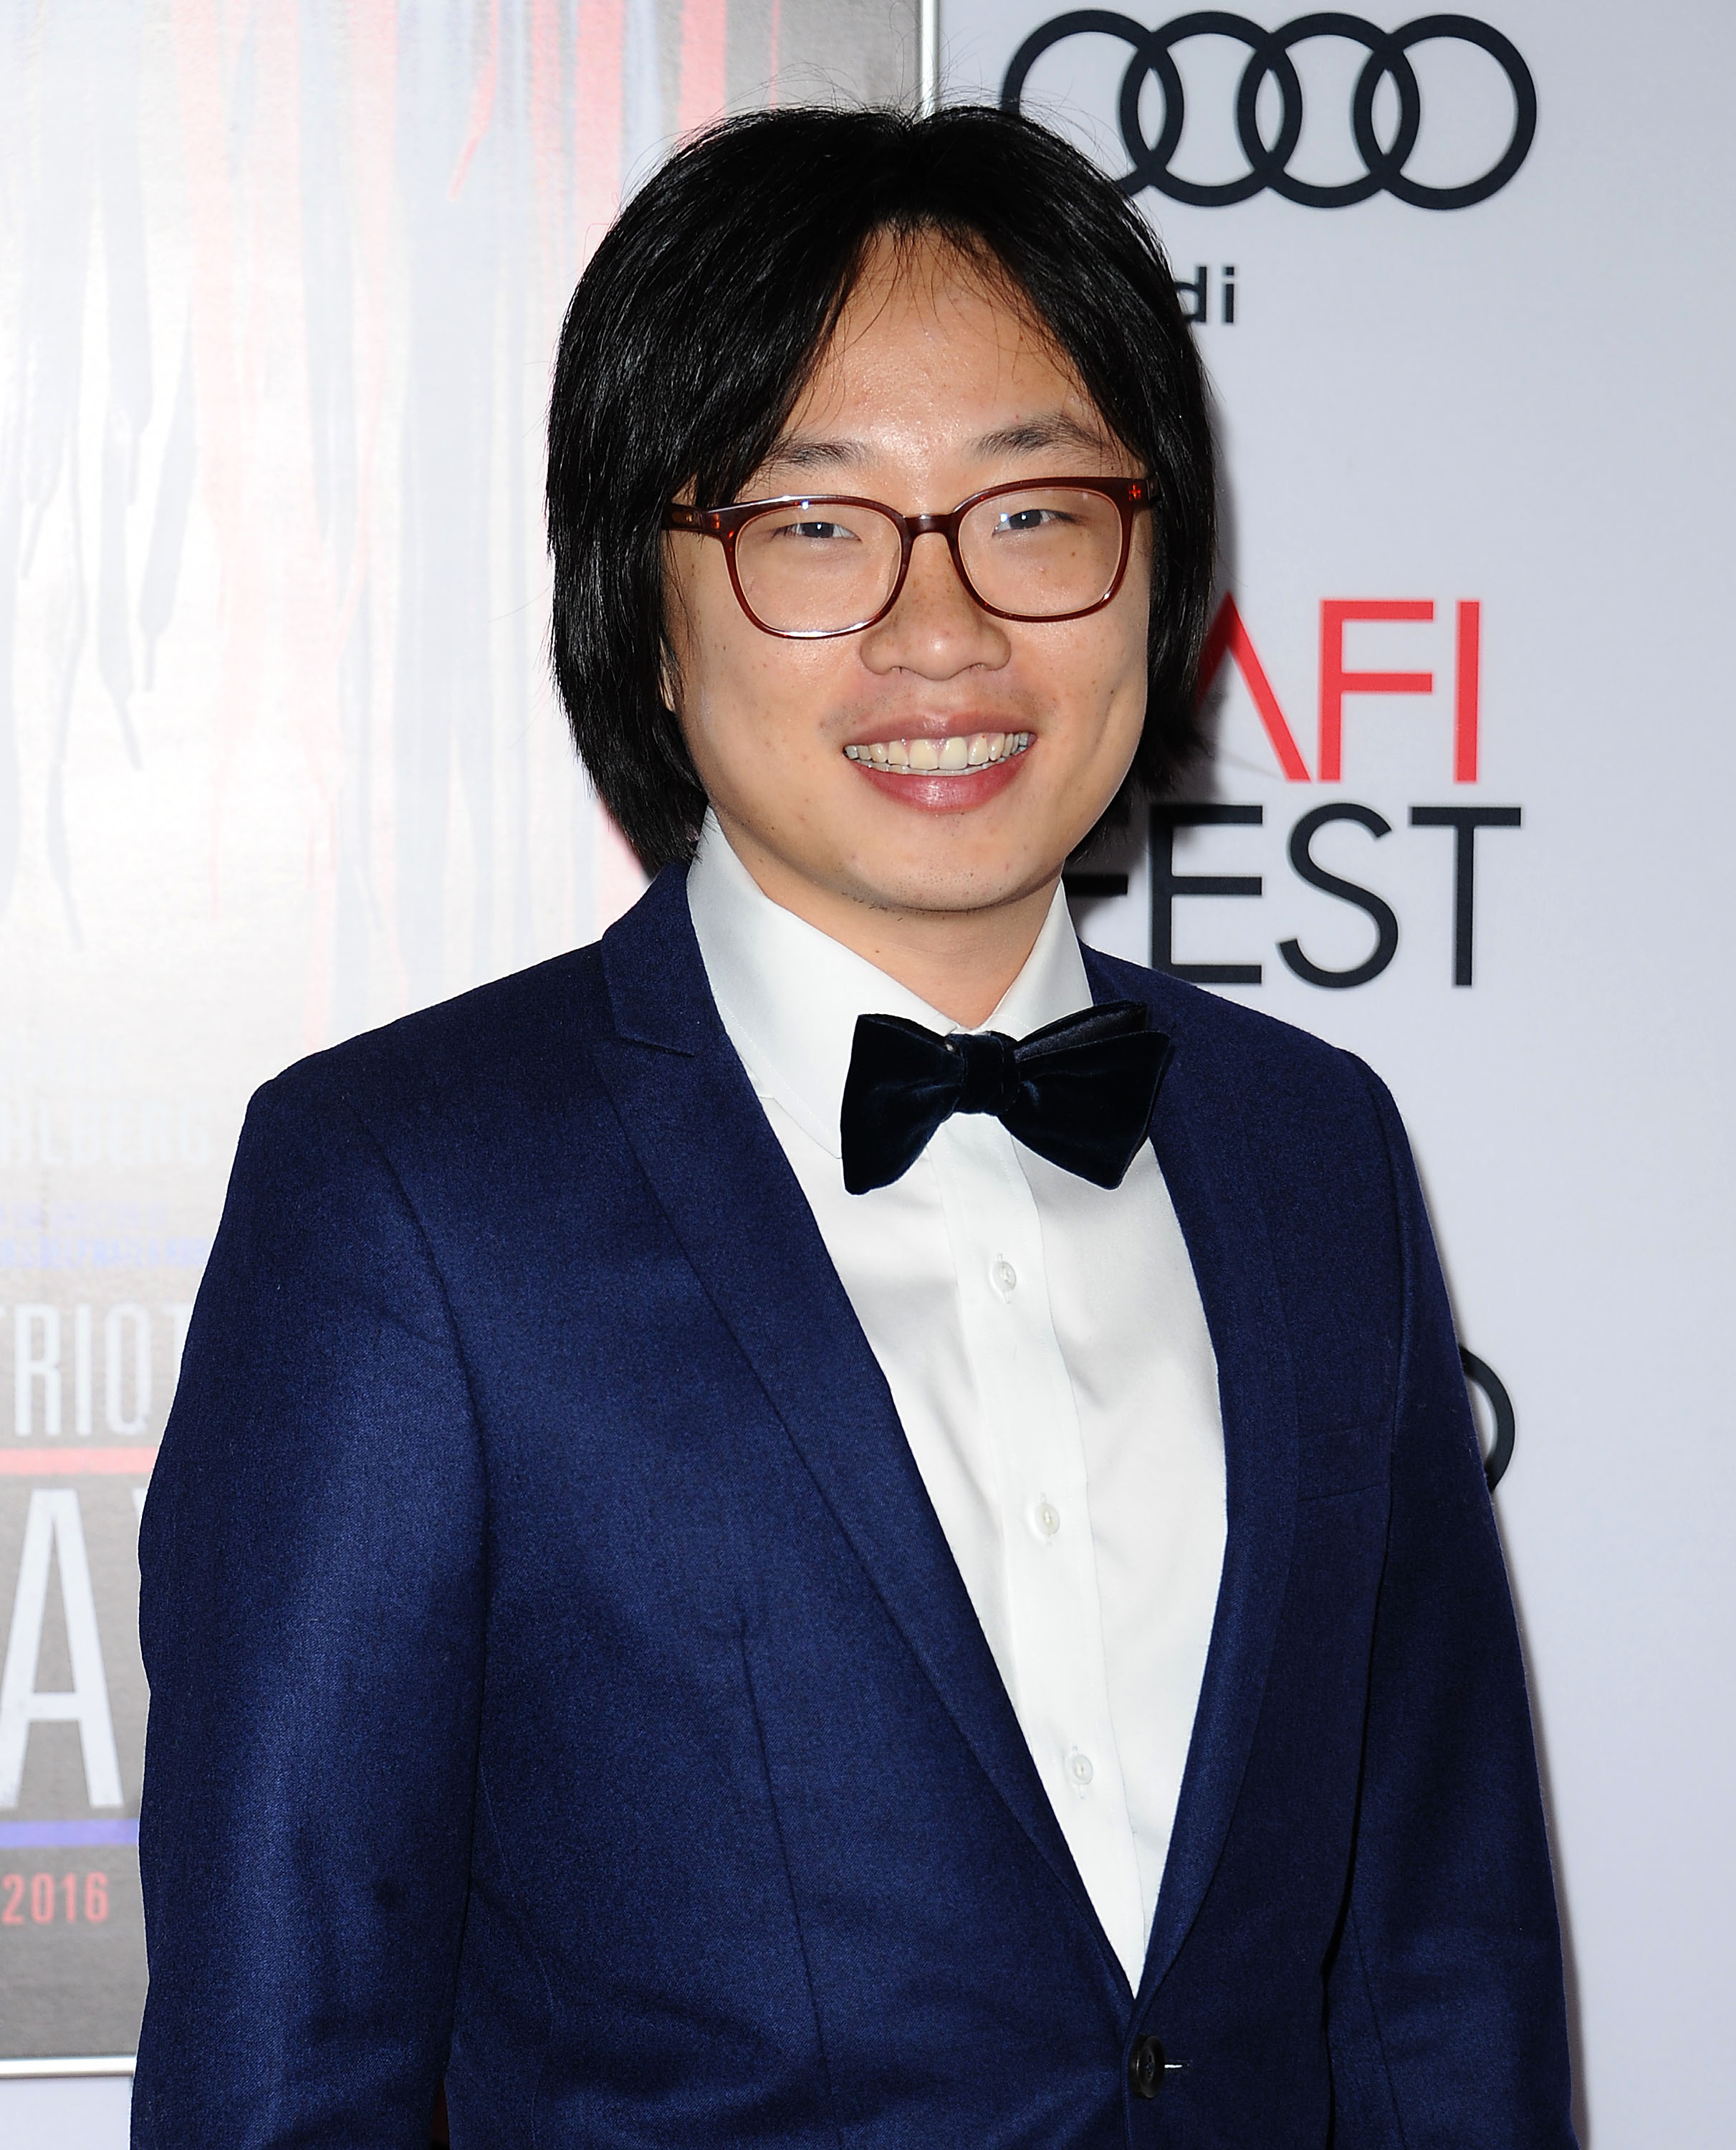 Jimmy O. Yang attends a screening of "Patriots Day" on November 17, 2016 in Hollywood, California. (Jason LaVeris— FilmMagic/Getty Images)